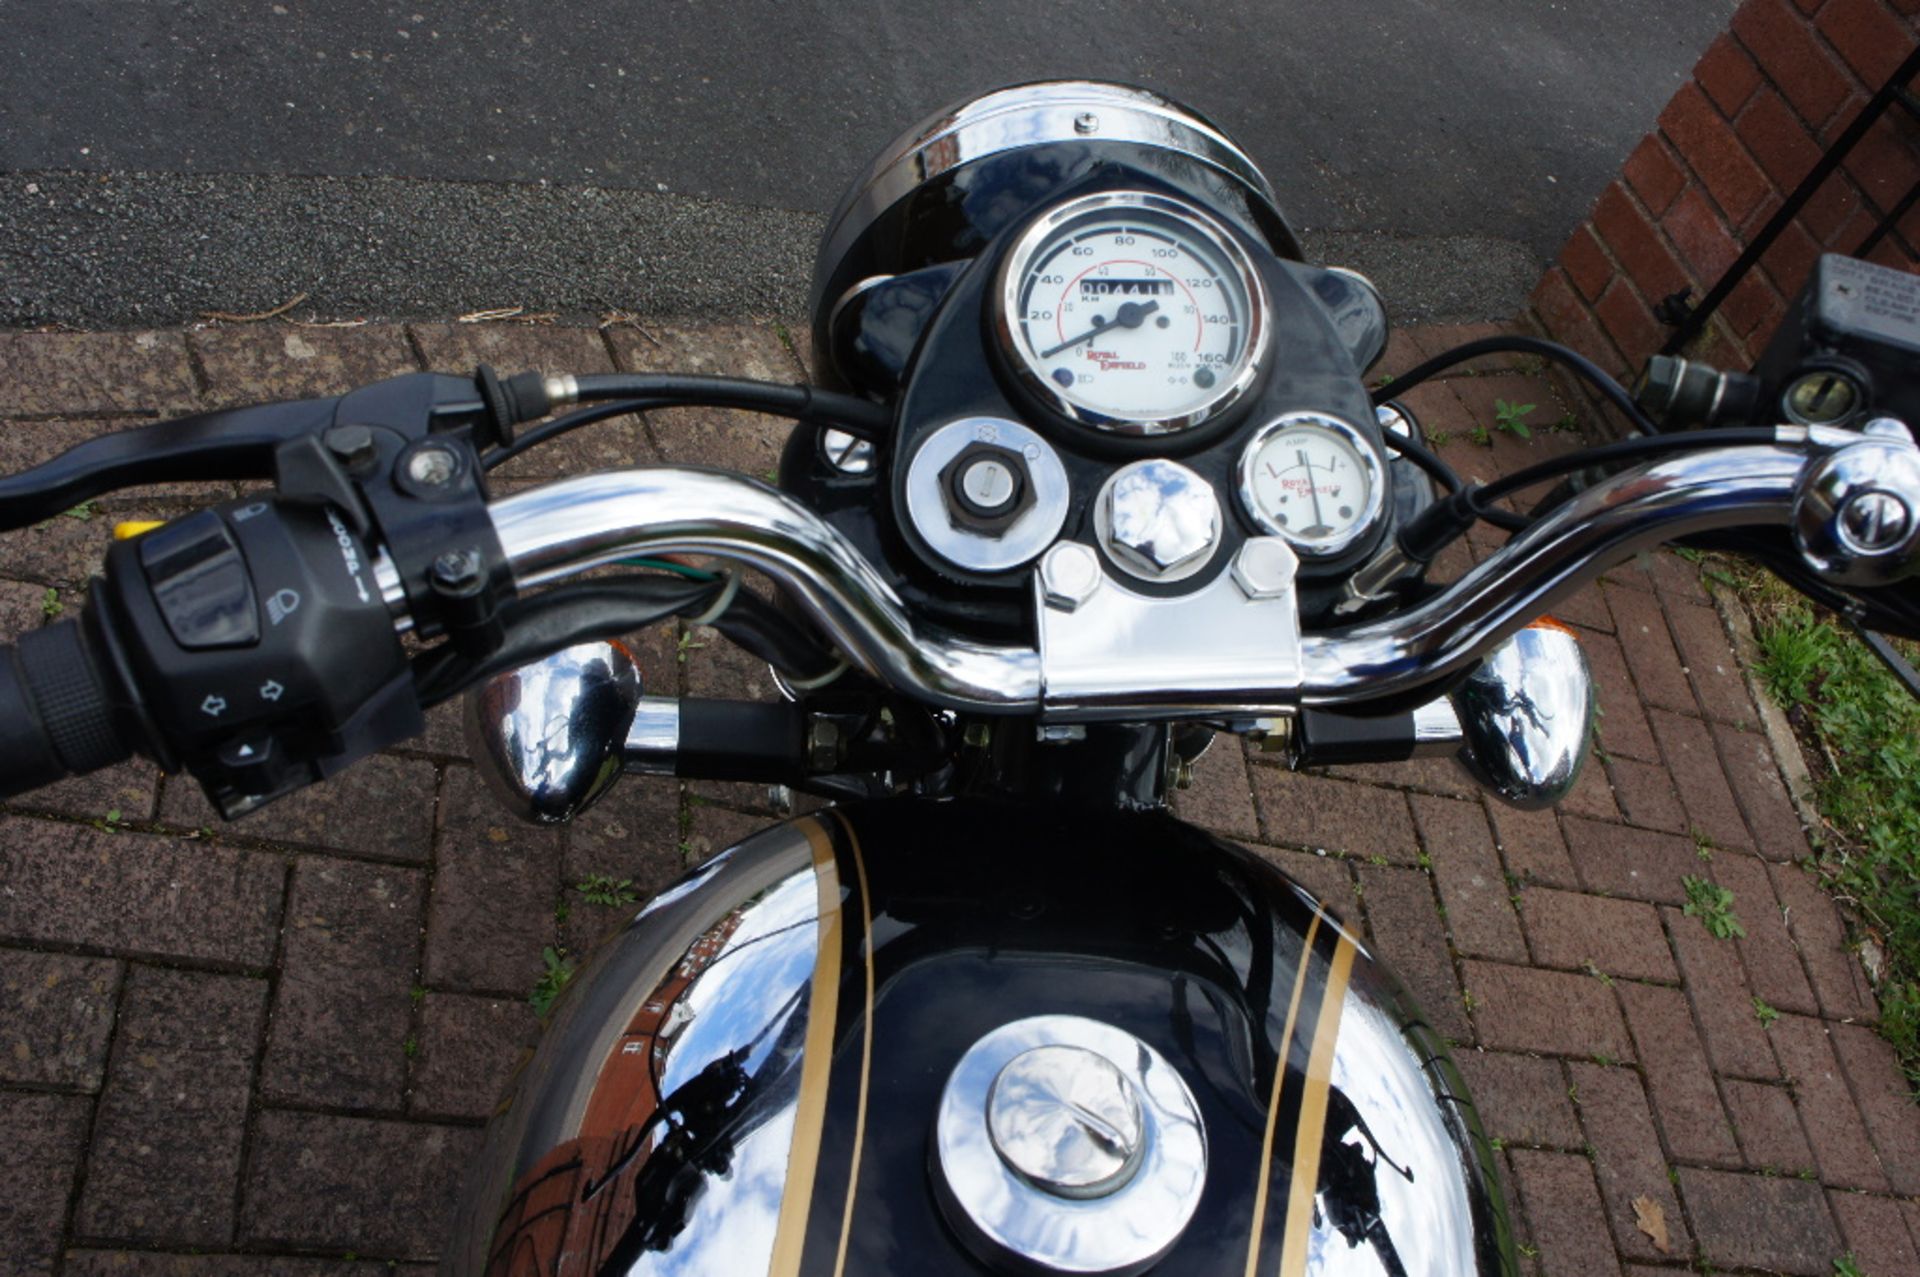 A 2009 Royal Enfield Bullet 350, registration number WA58 NMZ, chrome and black. - Image 4 of 4